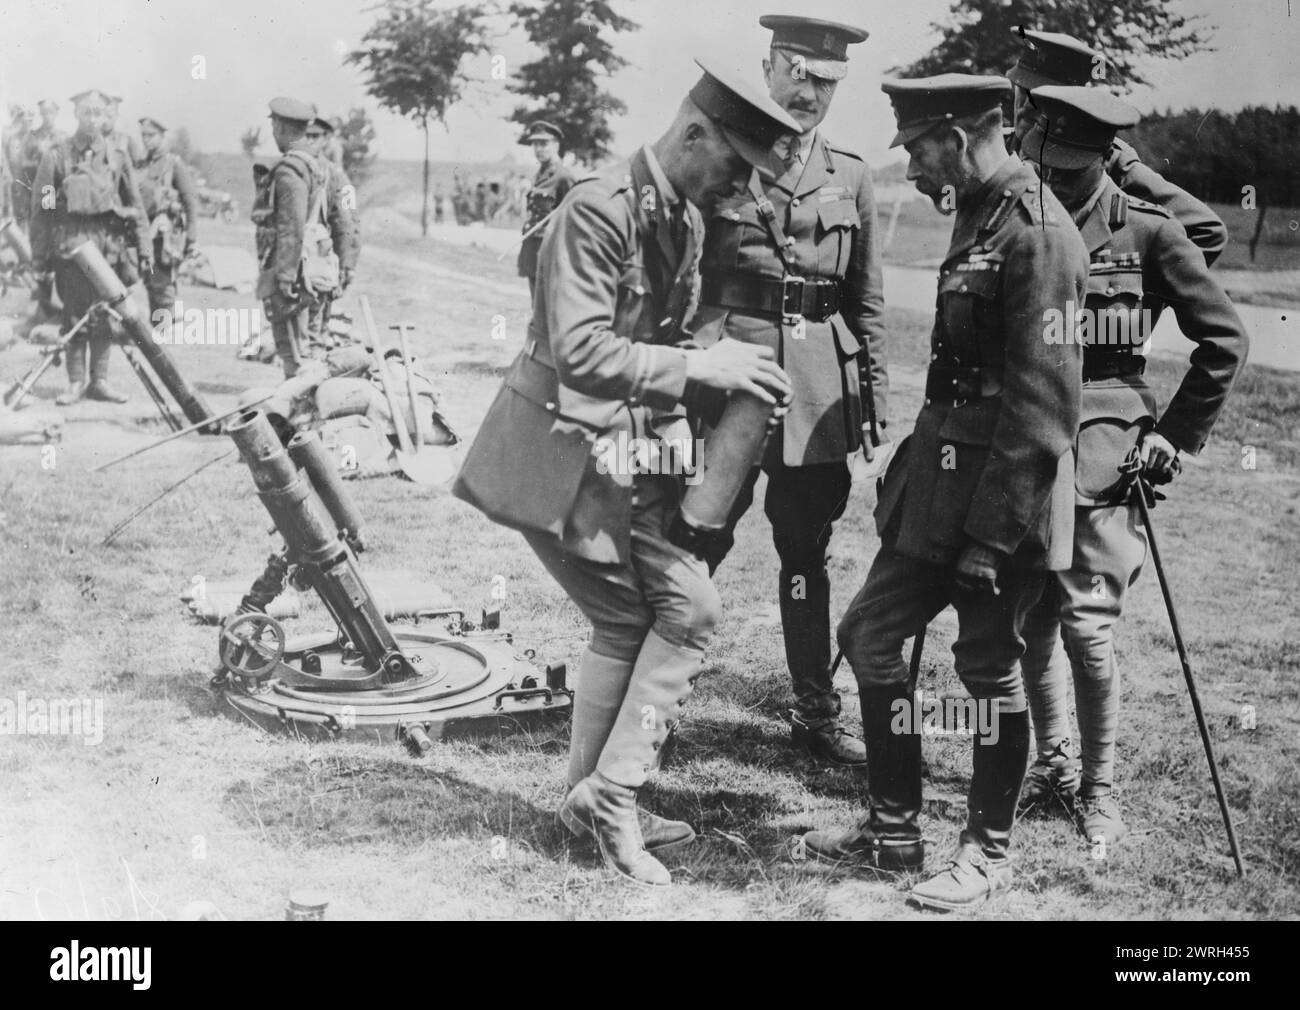 King Geo. studies trench bombs, 7 Jul 1917. British officers explaining trench mortar to King George V and Edward, Prince of Wales at the Trench Warfare School, Helfaut, France during World War I, July 7, 1917. Stock Photo